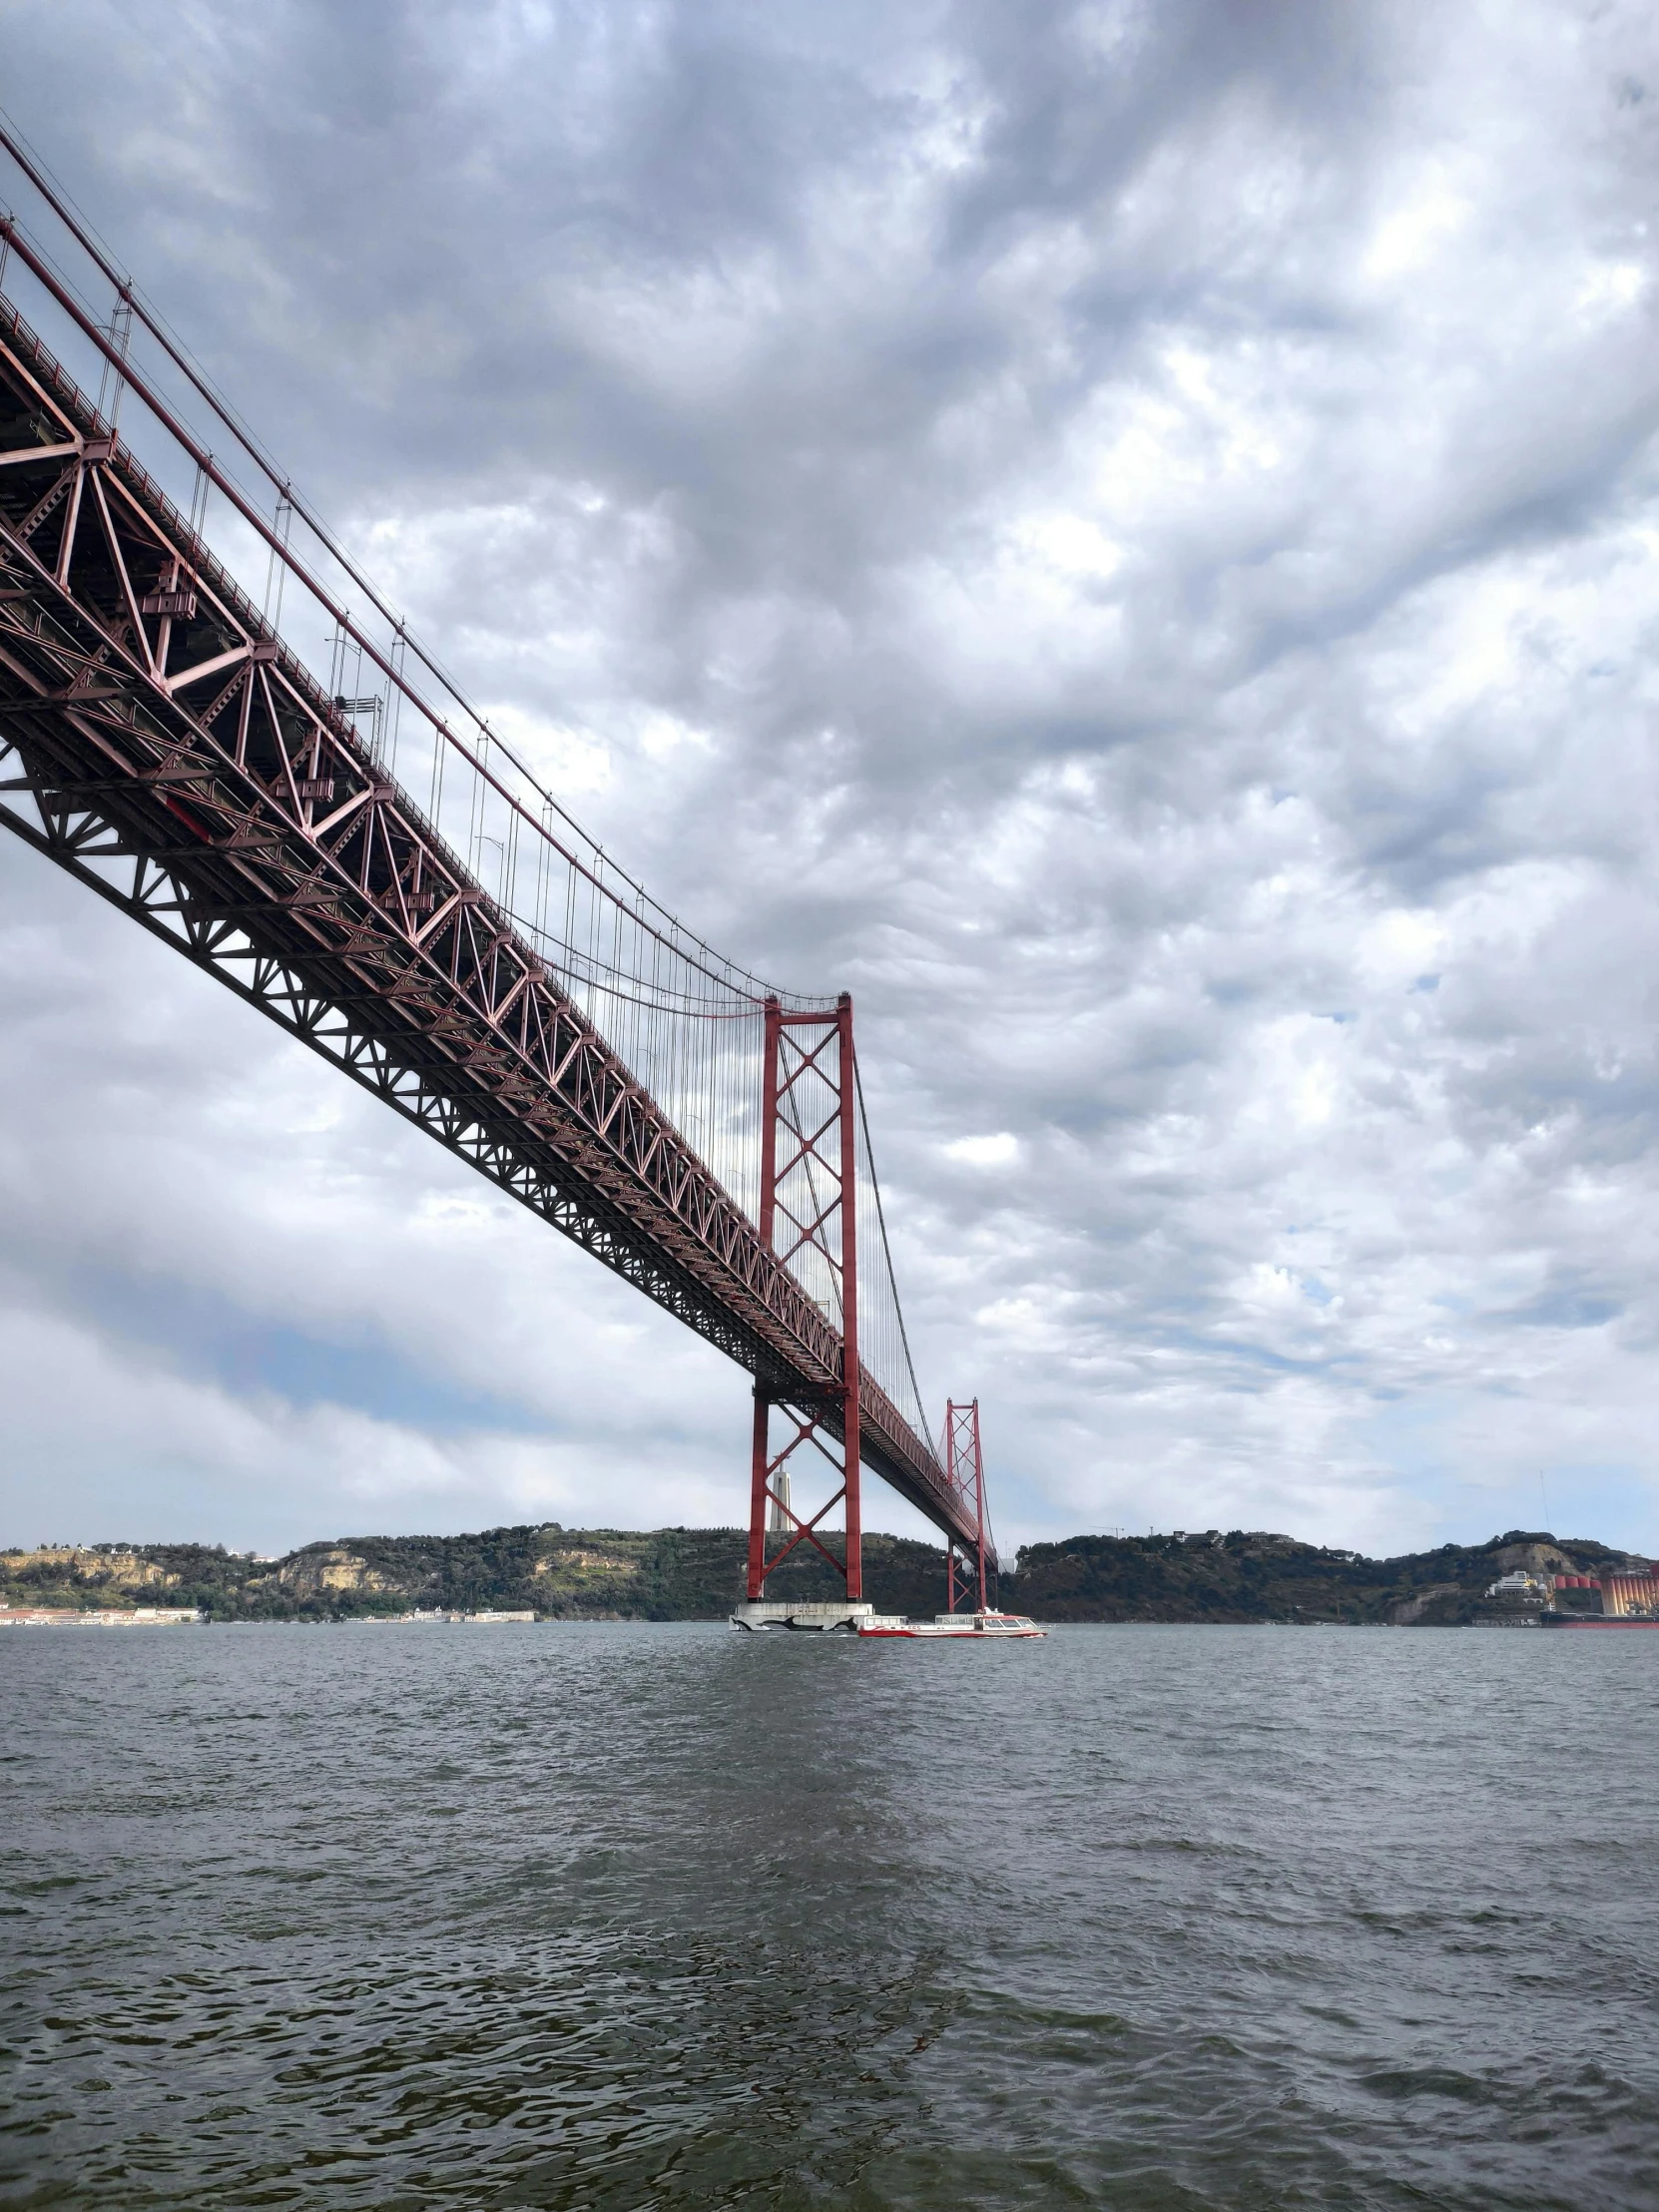 a large red bridge spanning across a body of water